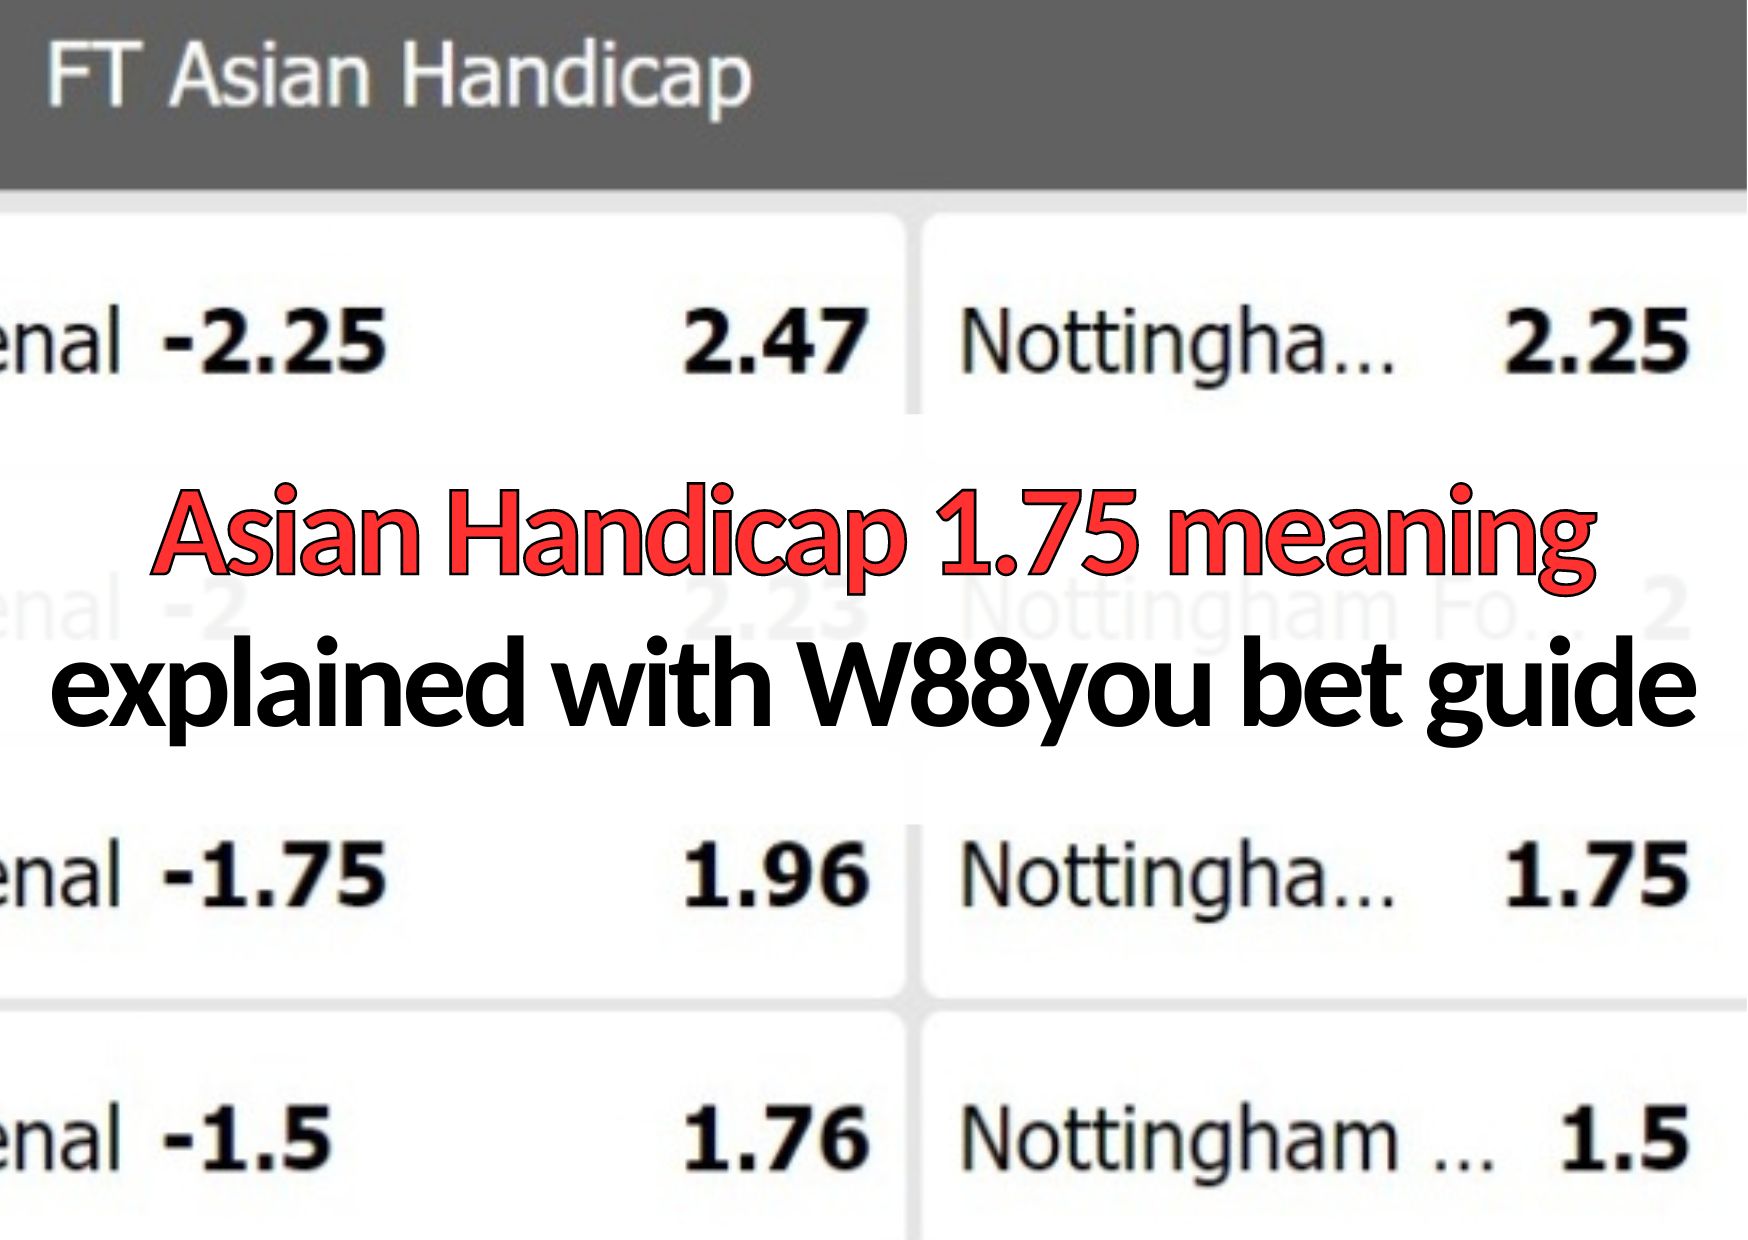 Asian Handicap 1.75 meaning